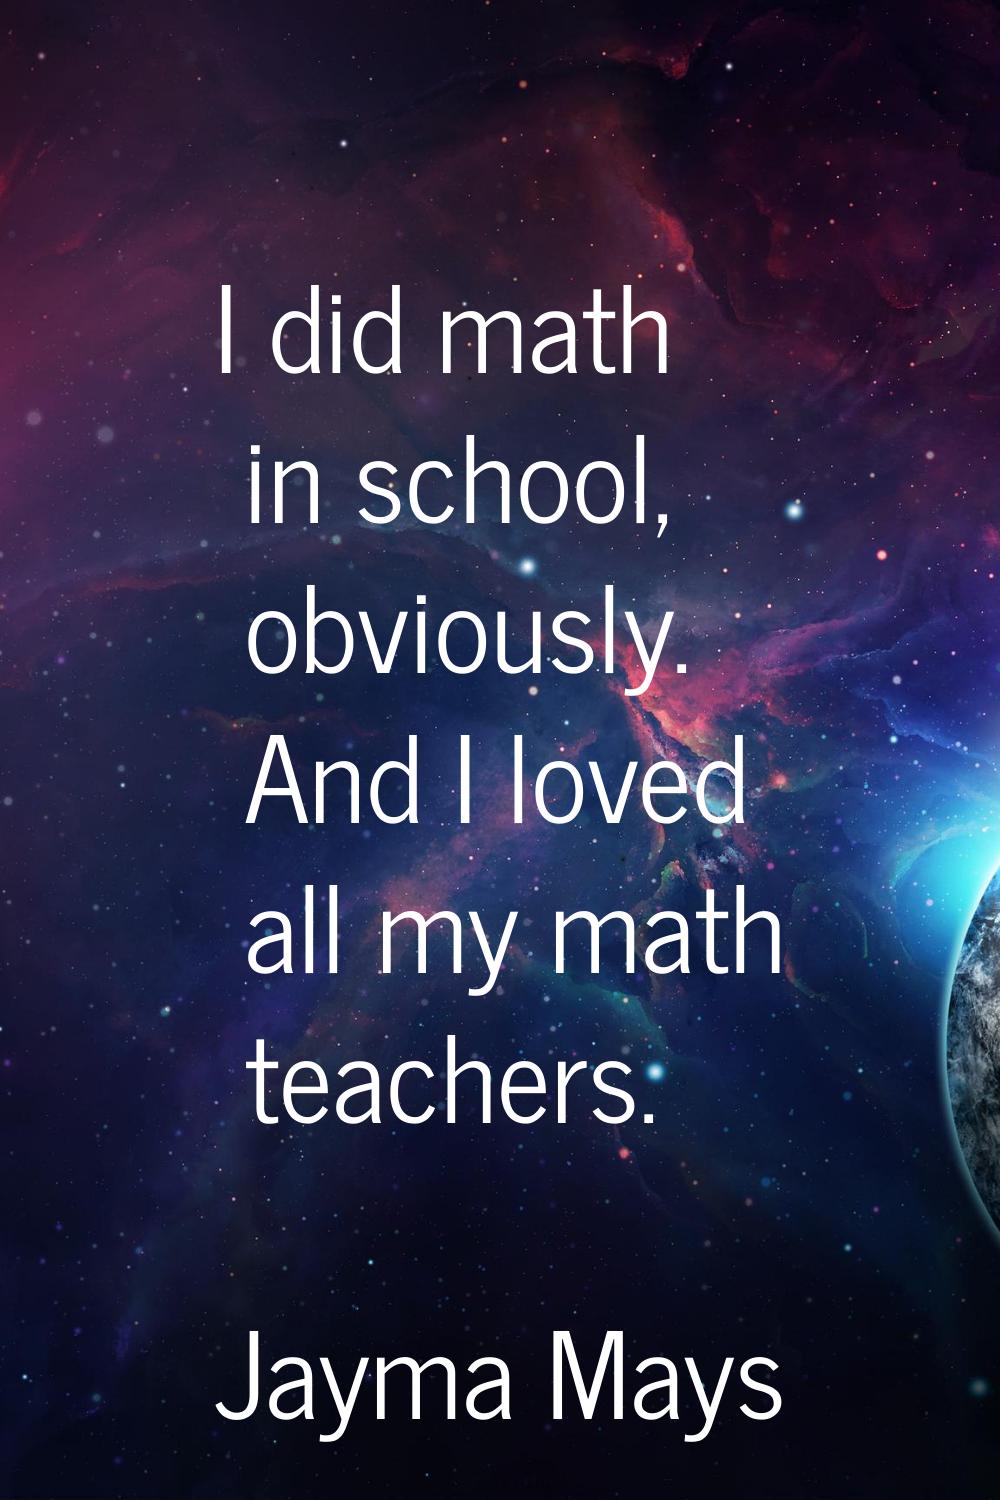 I did math in school, obviously. And I loved all my math teachers.